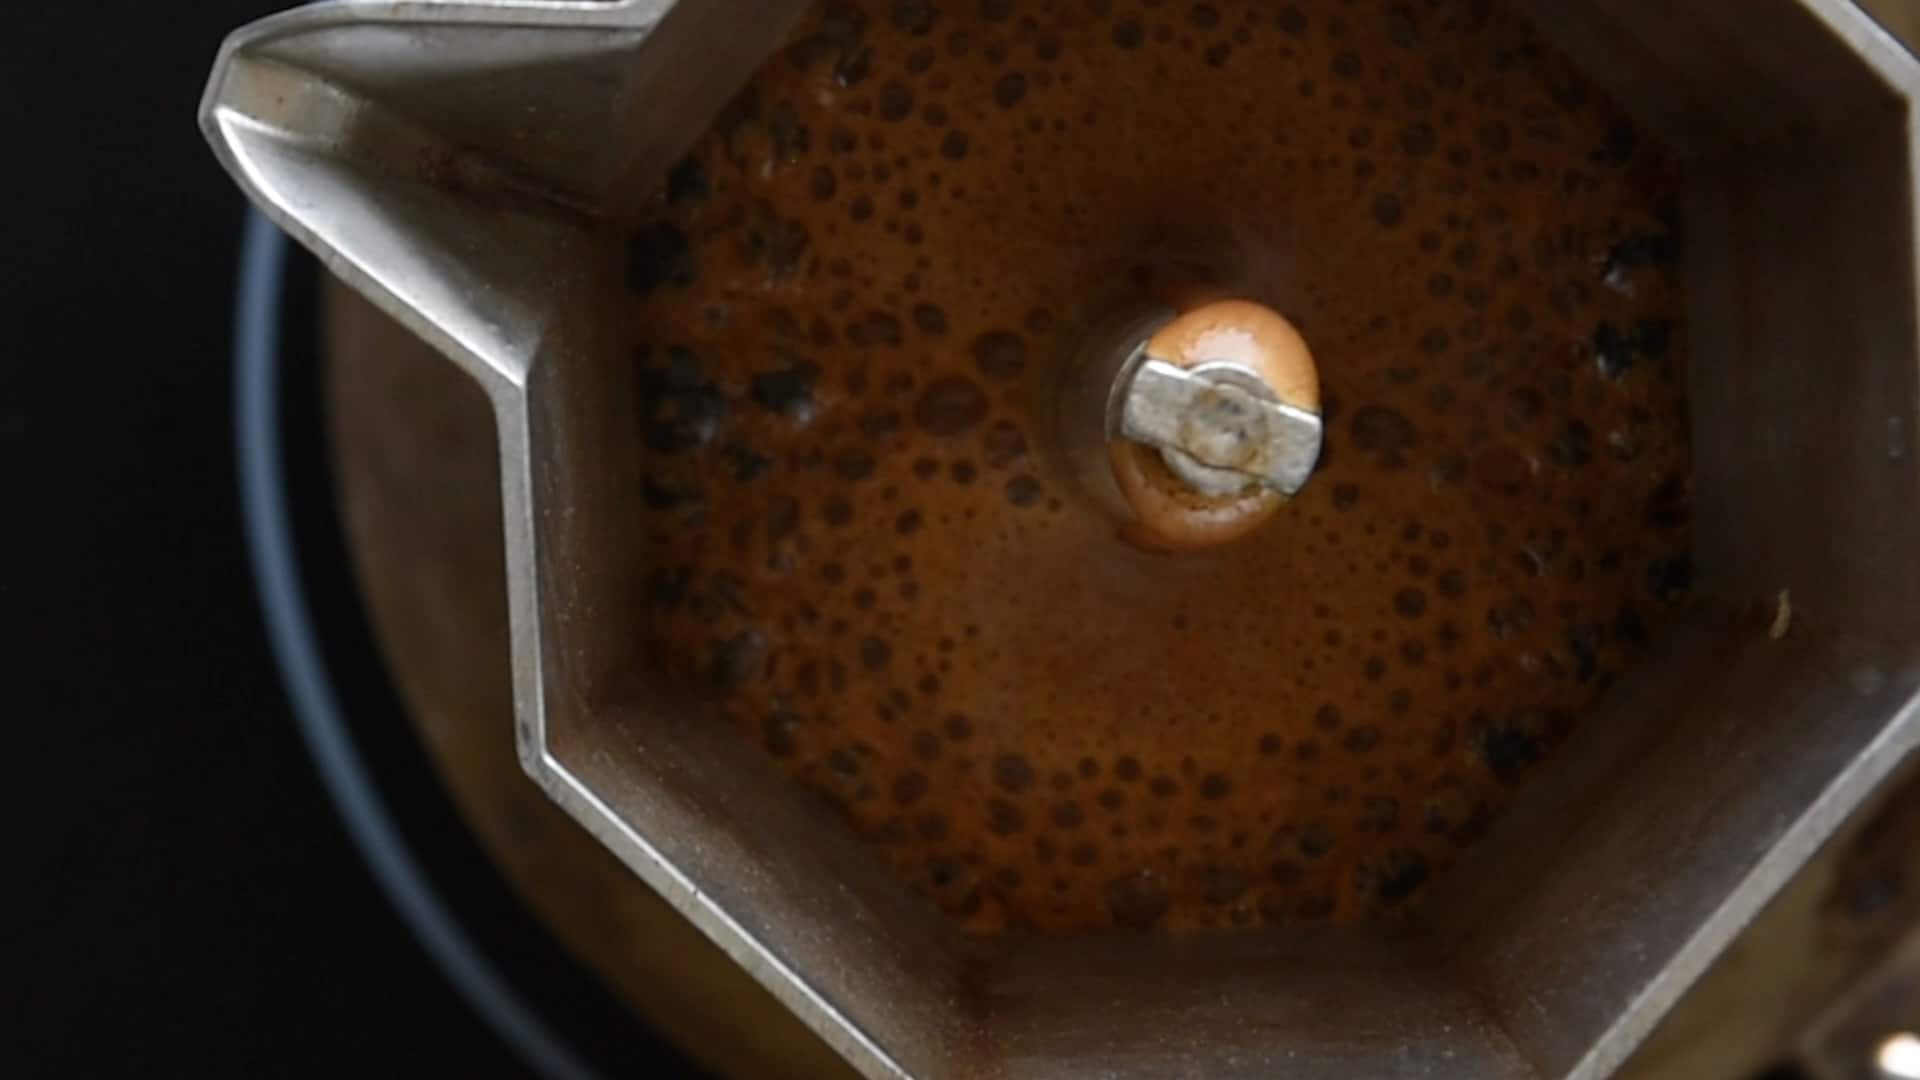 Coffee coming out in the top chamber